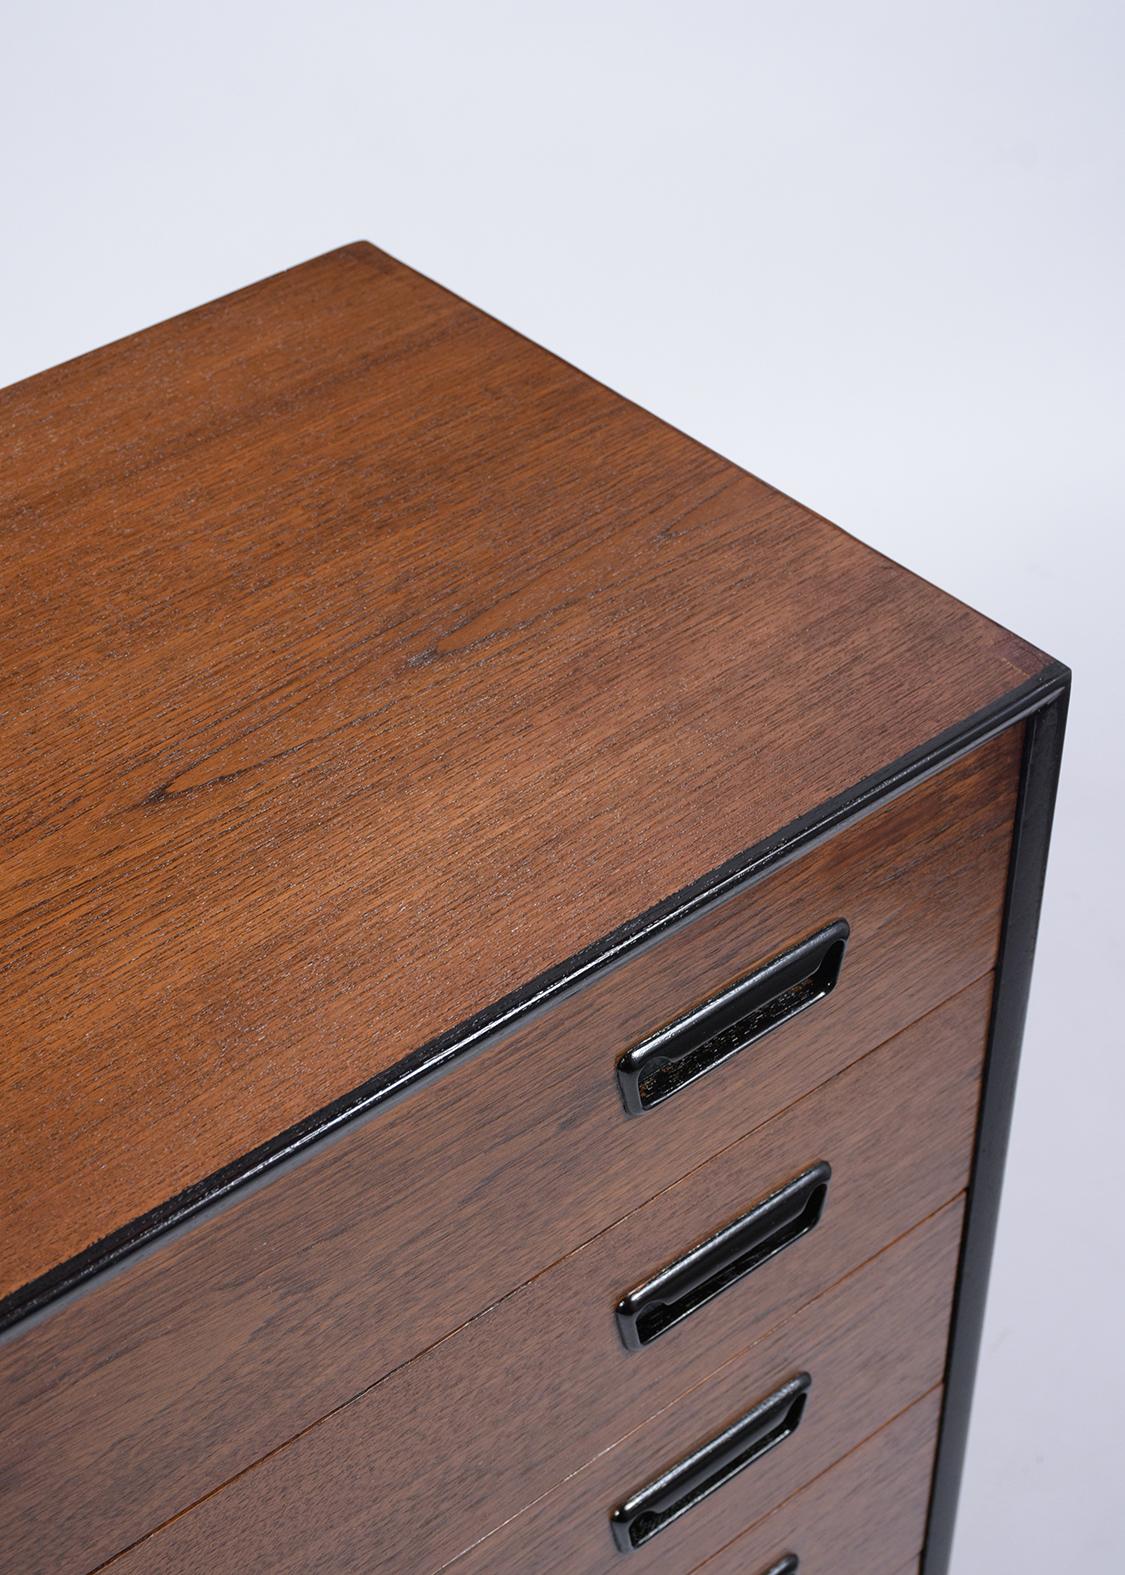 Lacquer 1960s Mid-Century Modern Danish Teak Wood Chest of Drawers with Ebonized Accents For Sale